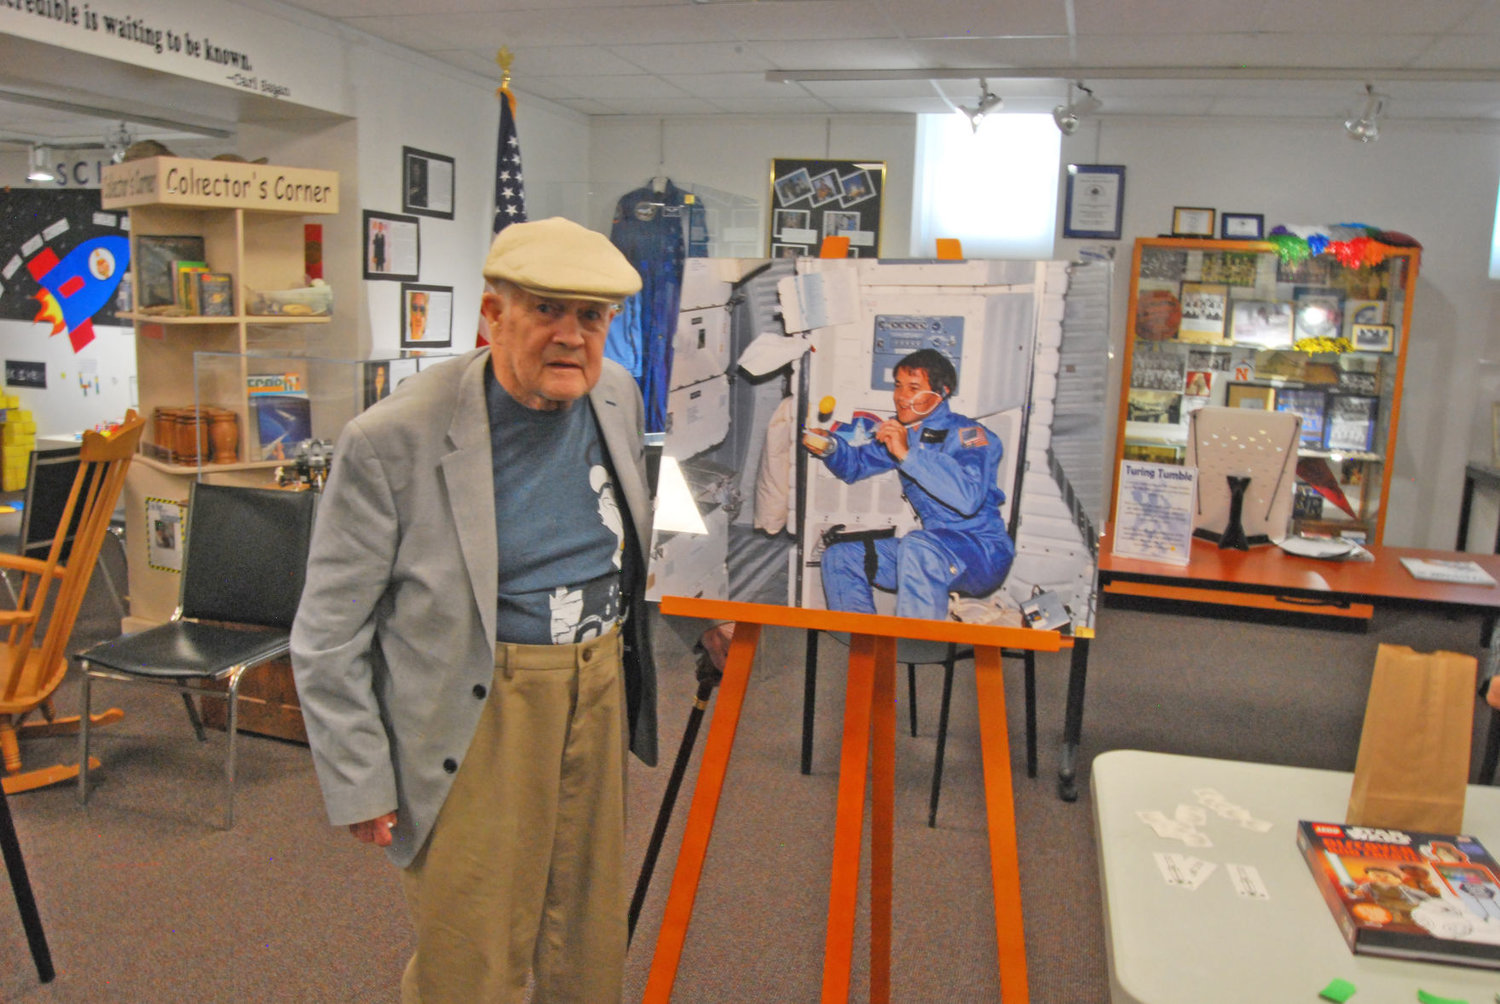 Retired astronaut Joe Allen stands next to a photo of himself from a 1980s space shuttle flight at the Carnegie Museum of Montgomery County. Allen visited the museum to help celebrate the 50th anniversary of the moon landing.